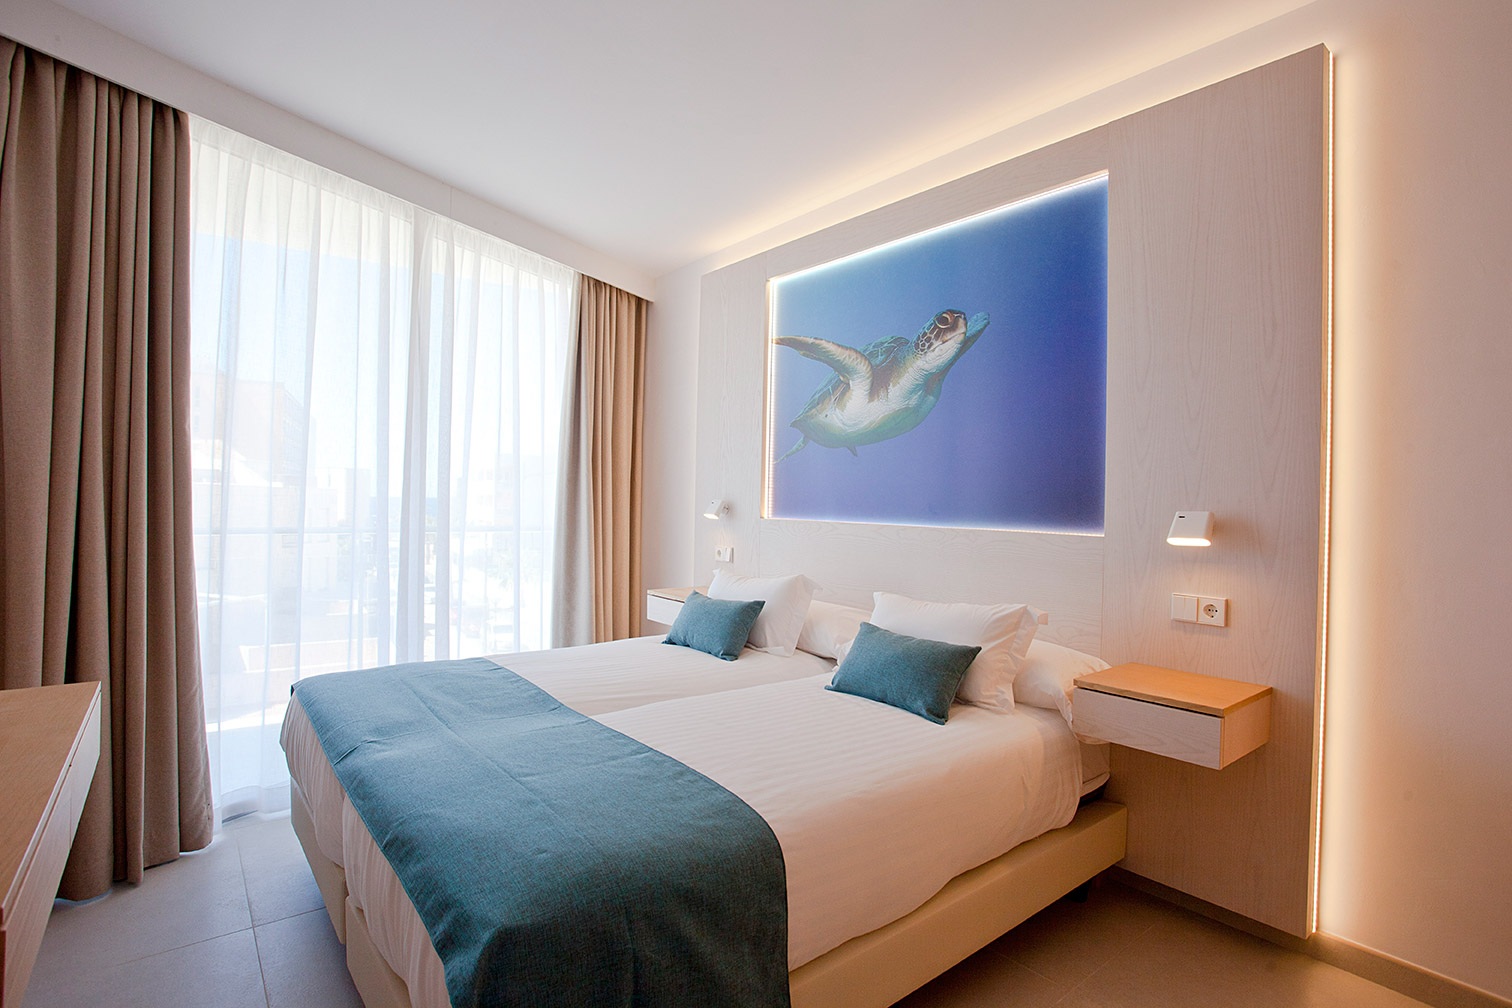 Bedroom with turtle image